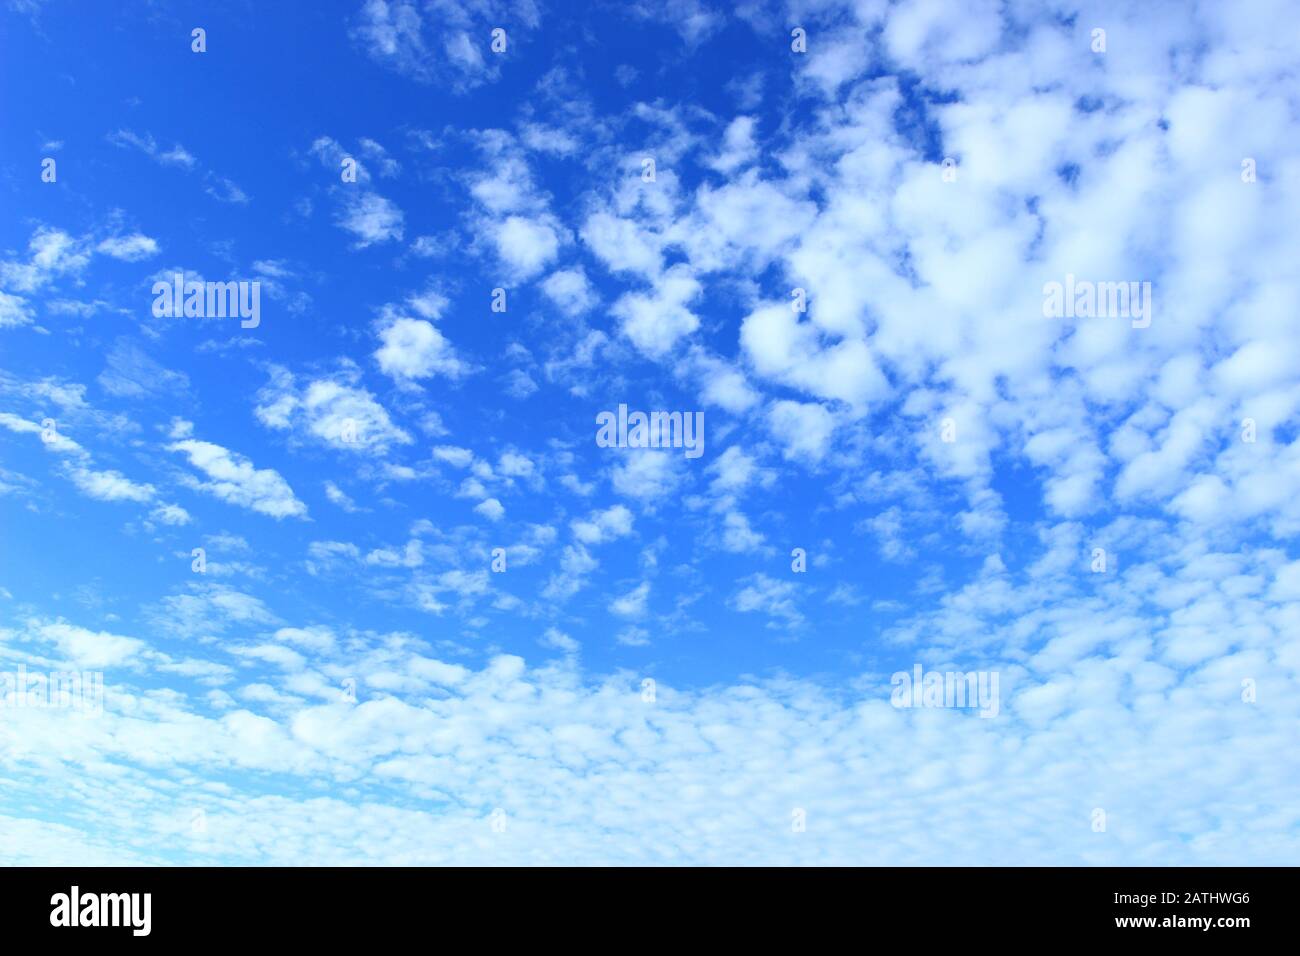 Blue sky with nice weather clouds Stock Photo